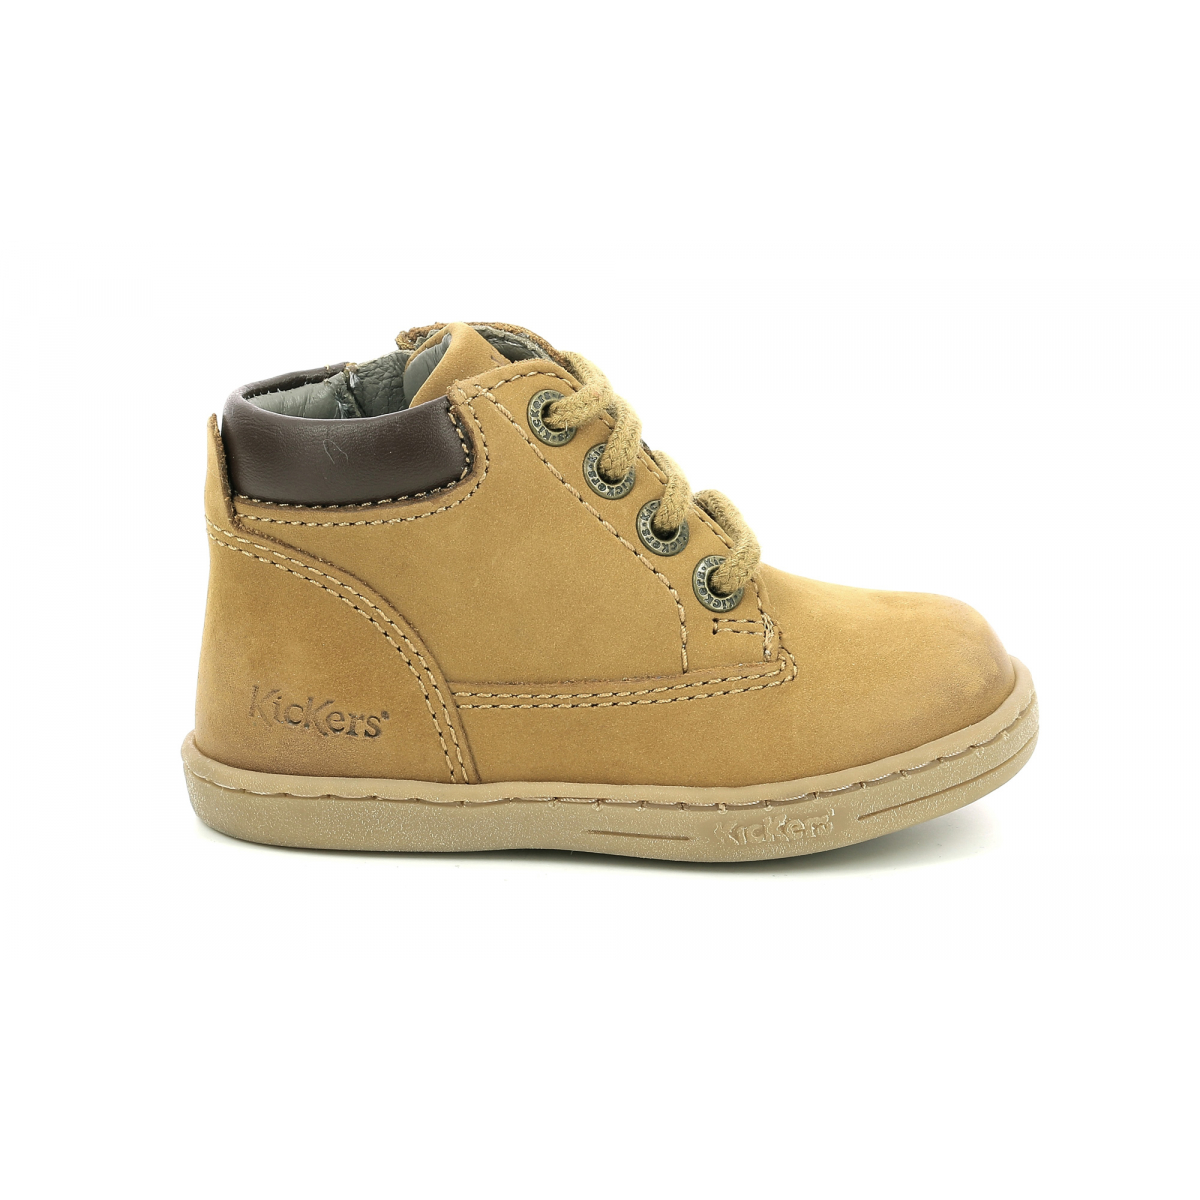 Kickers Kickers Tackland Ankle Boots Kids Lace-up Unisex Camel Marron 537938-10 